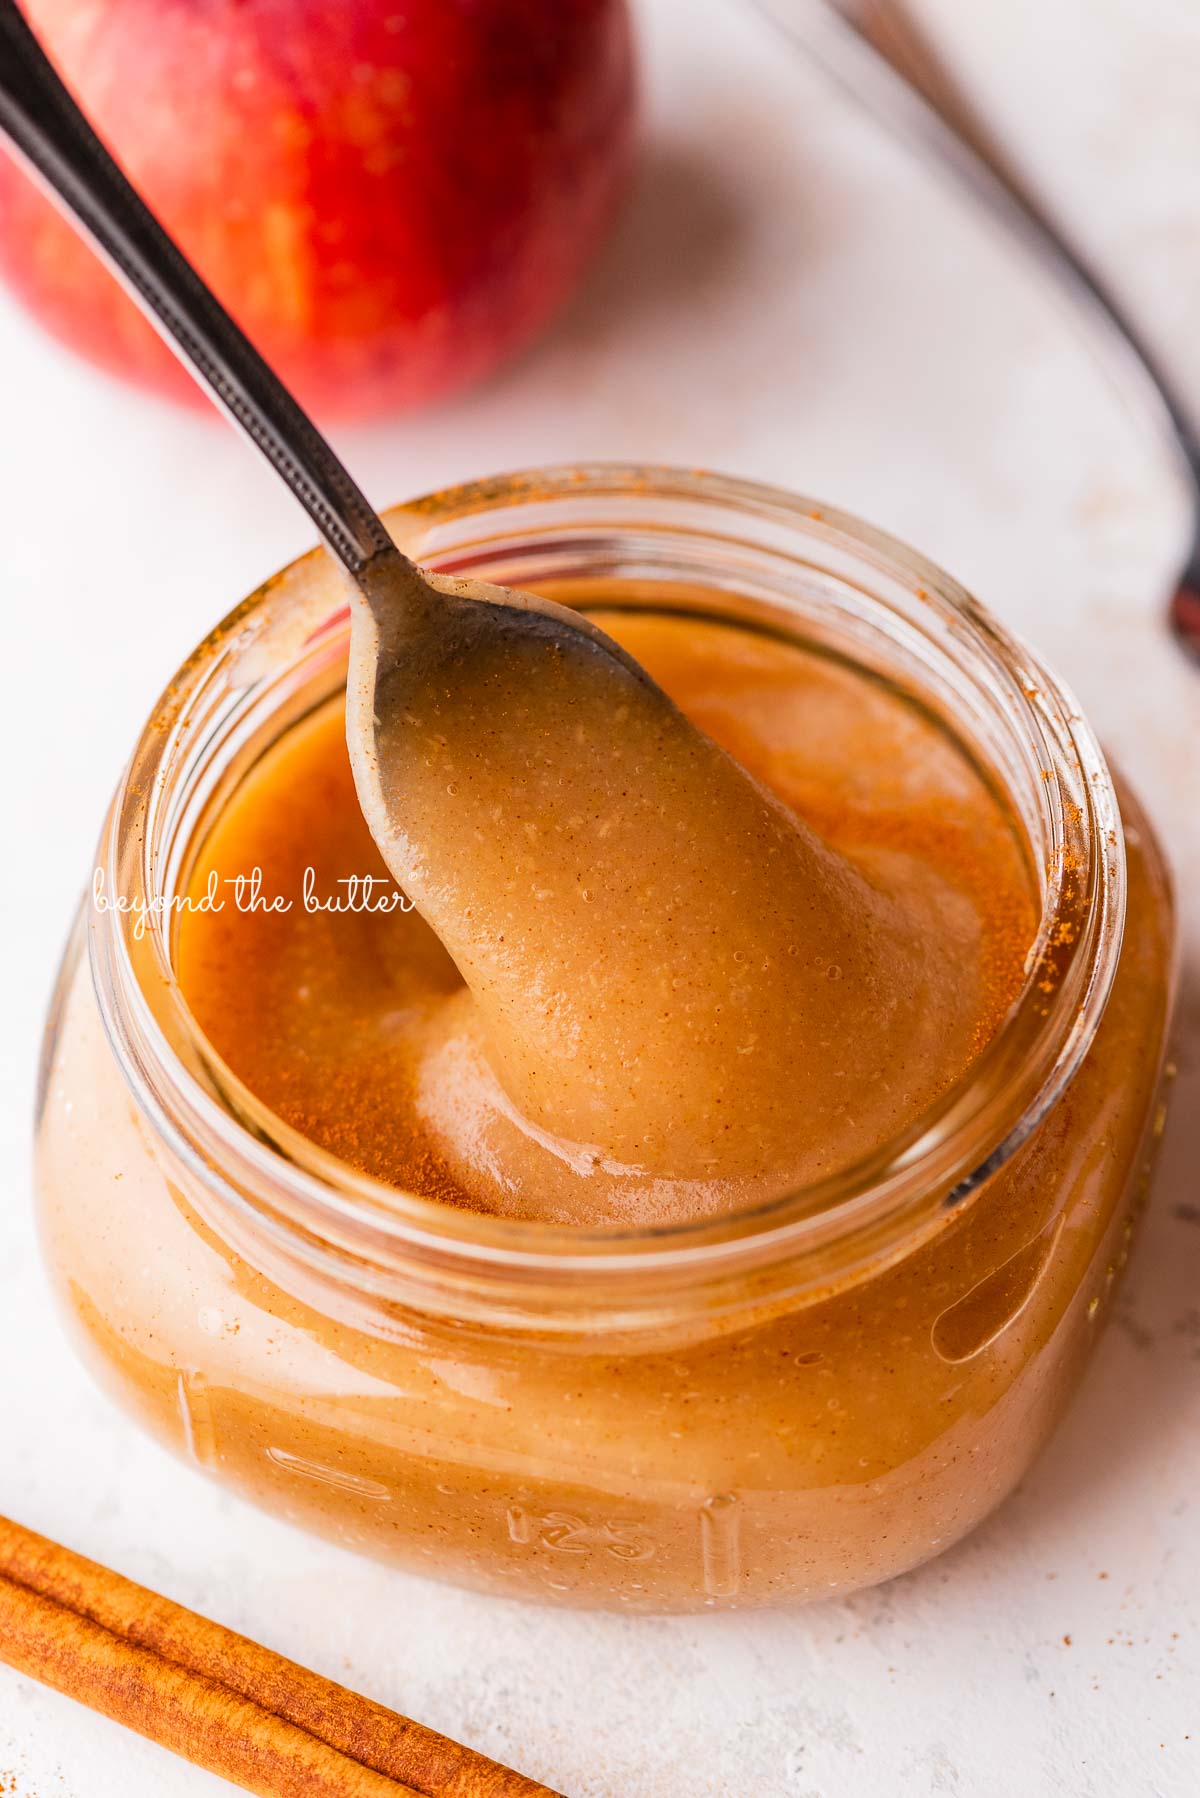 Filled glass jar of no sugar added homemade applesauce with a spoon on white background with apples | © Beyond the Butter®